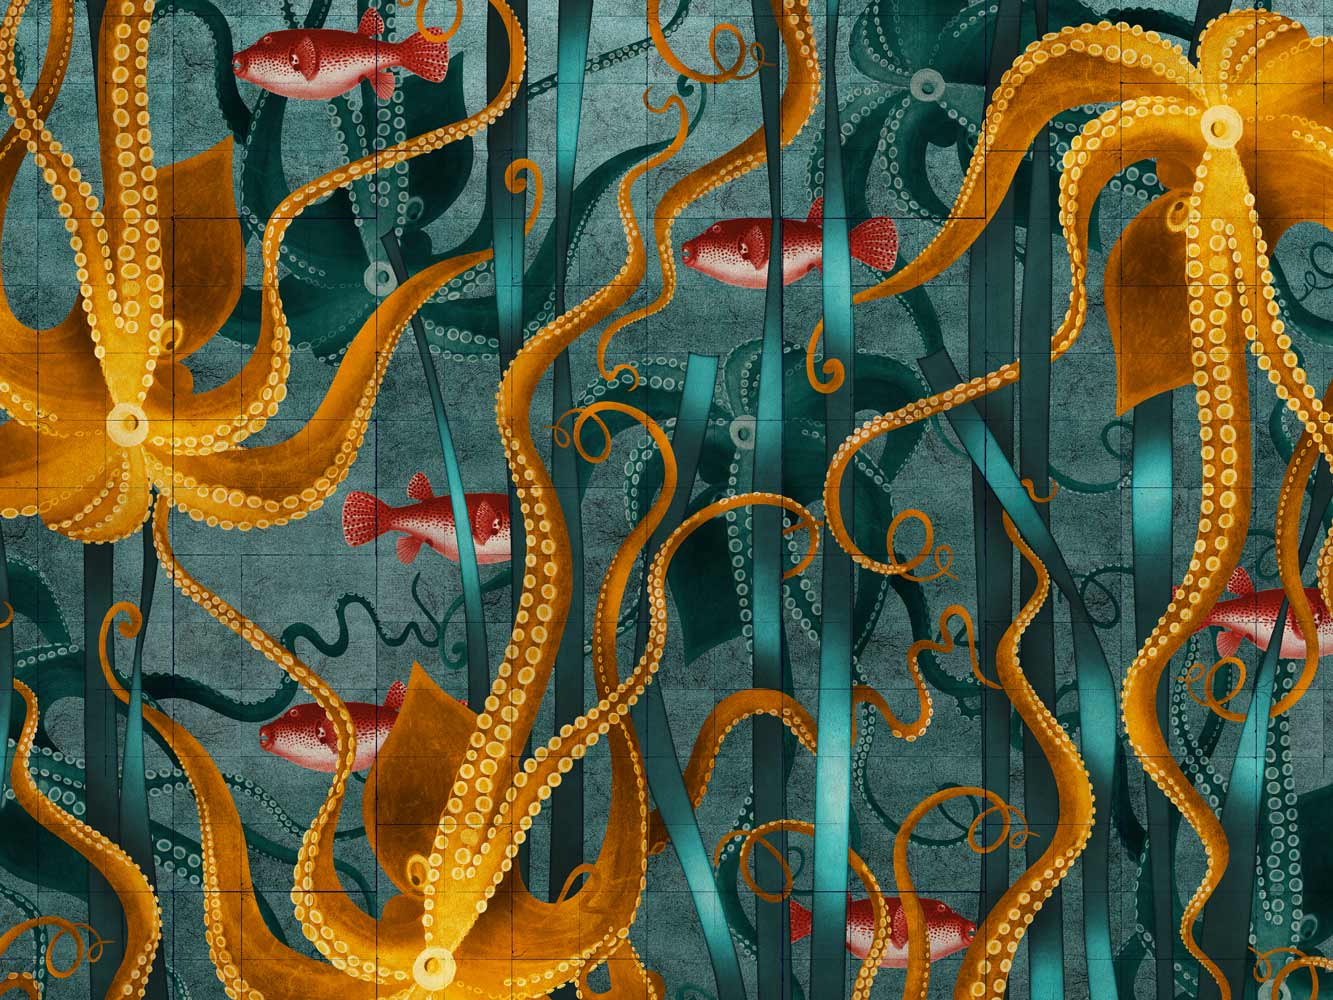 Kraken design landscape scene with golden octopus intertwined with blue seaweed ribbons